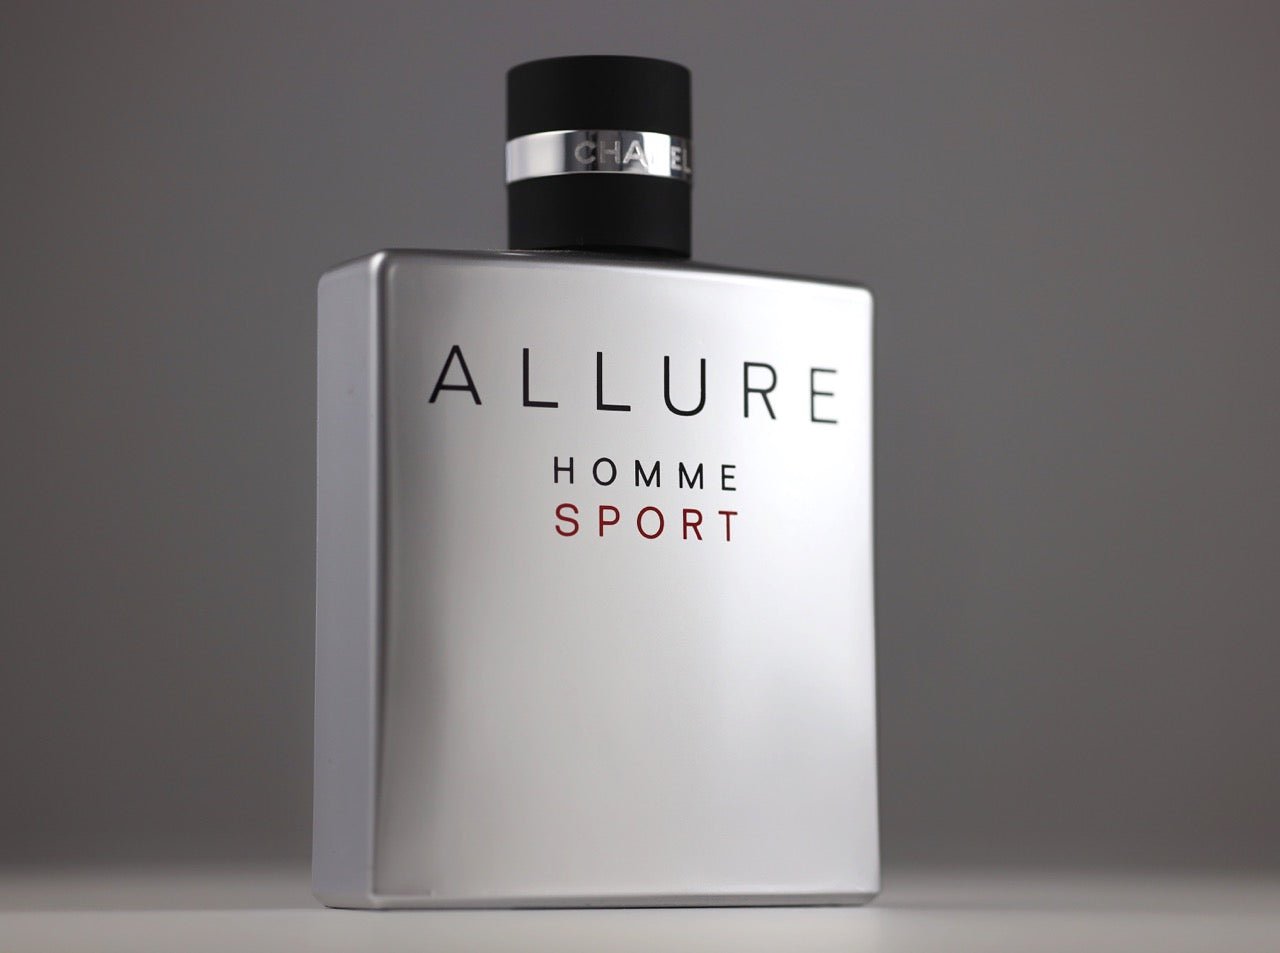 Allure Homme by Chanel - Samples